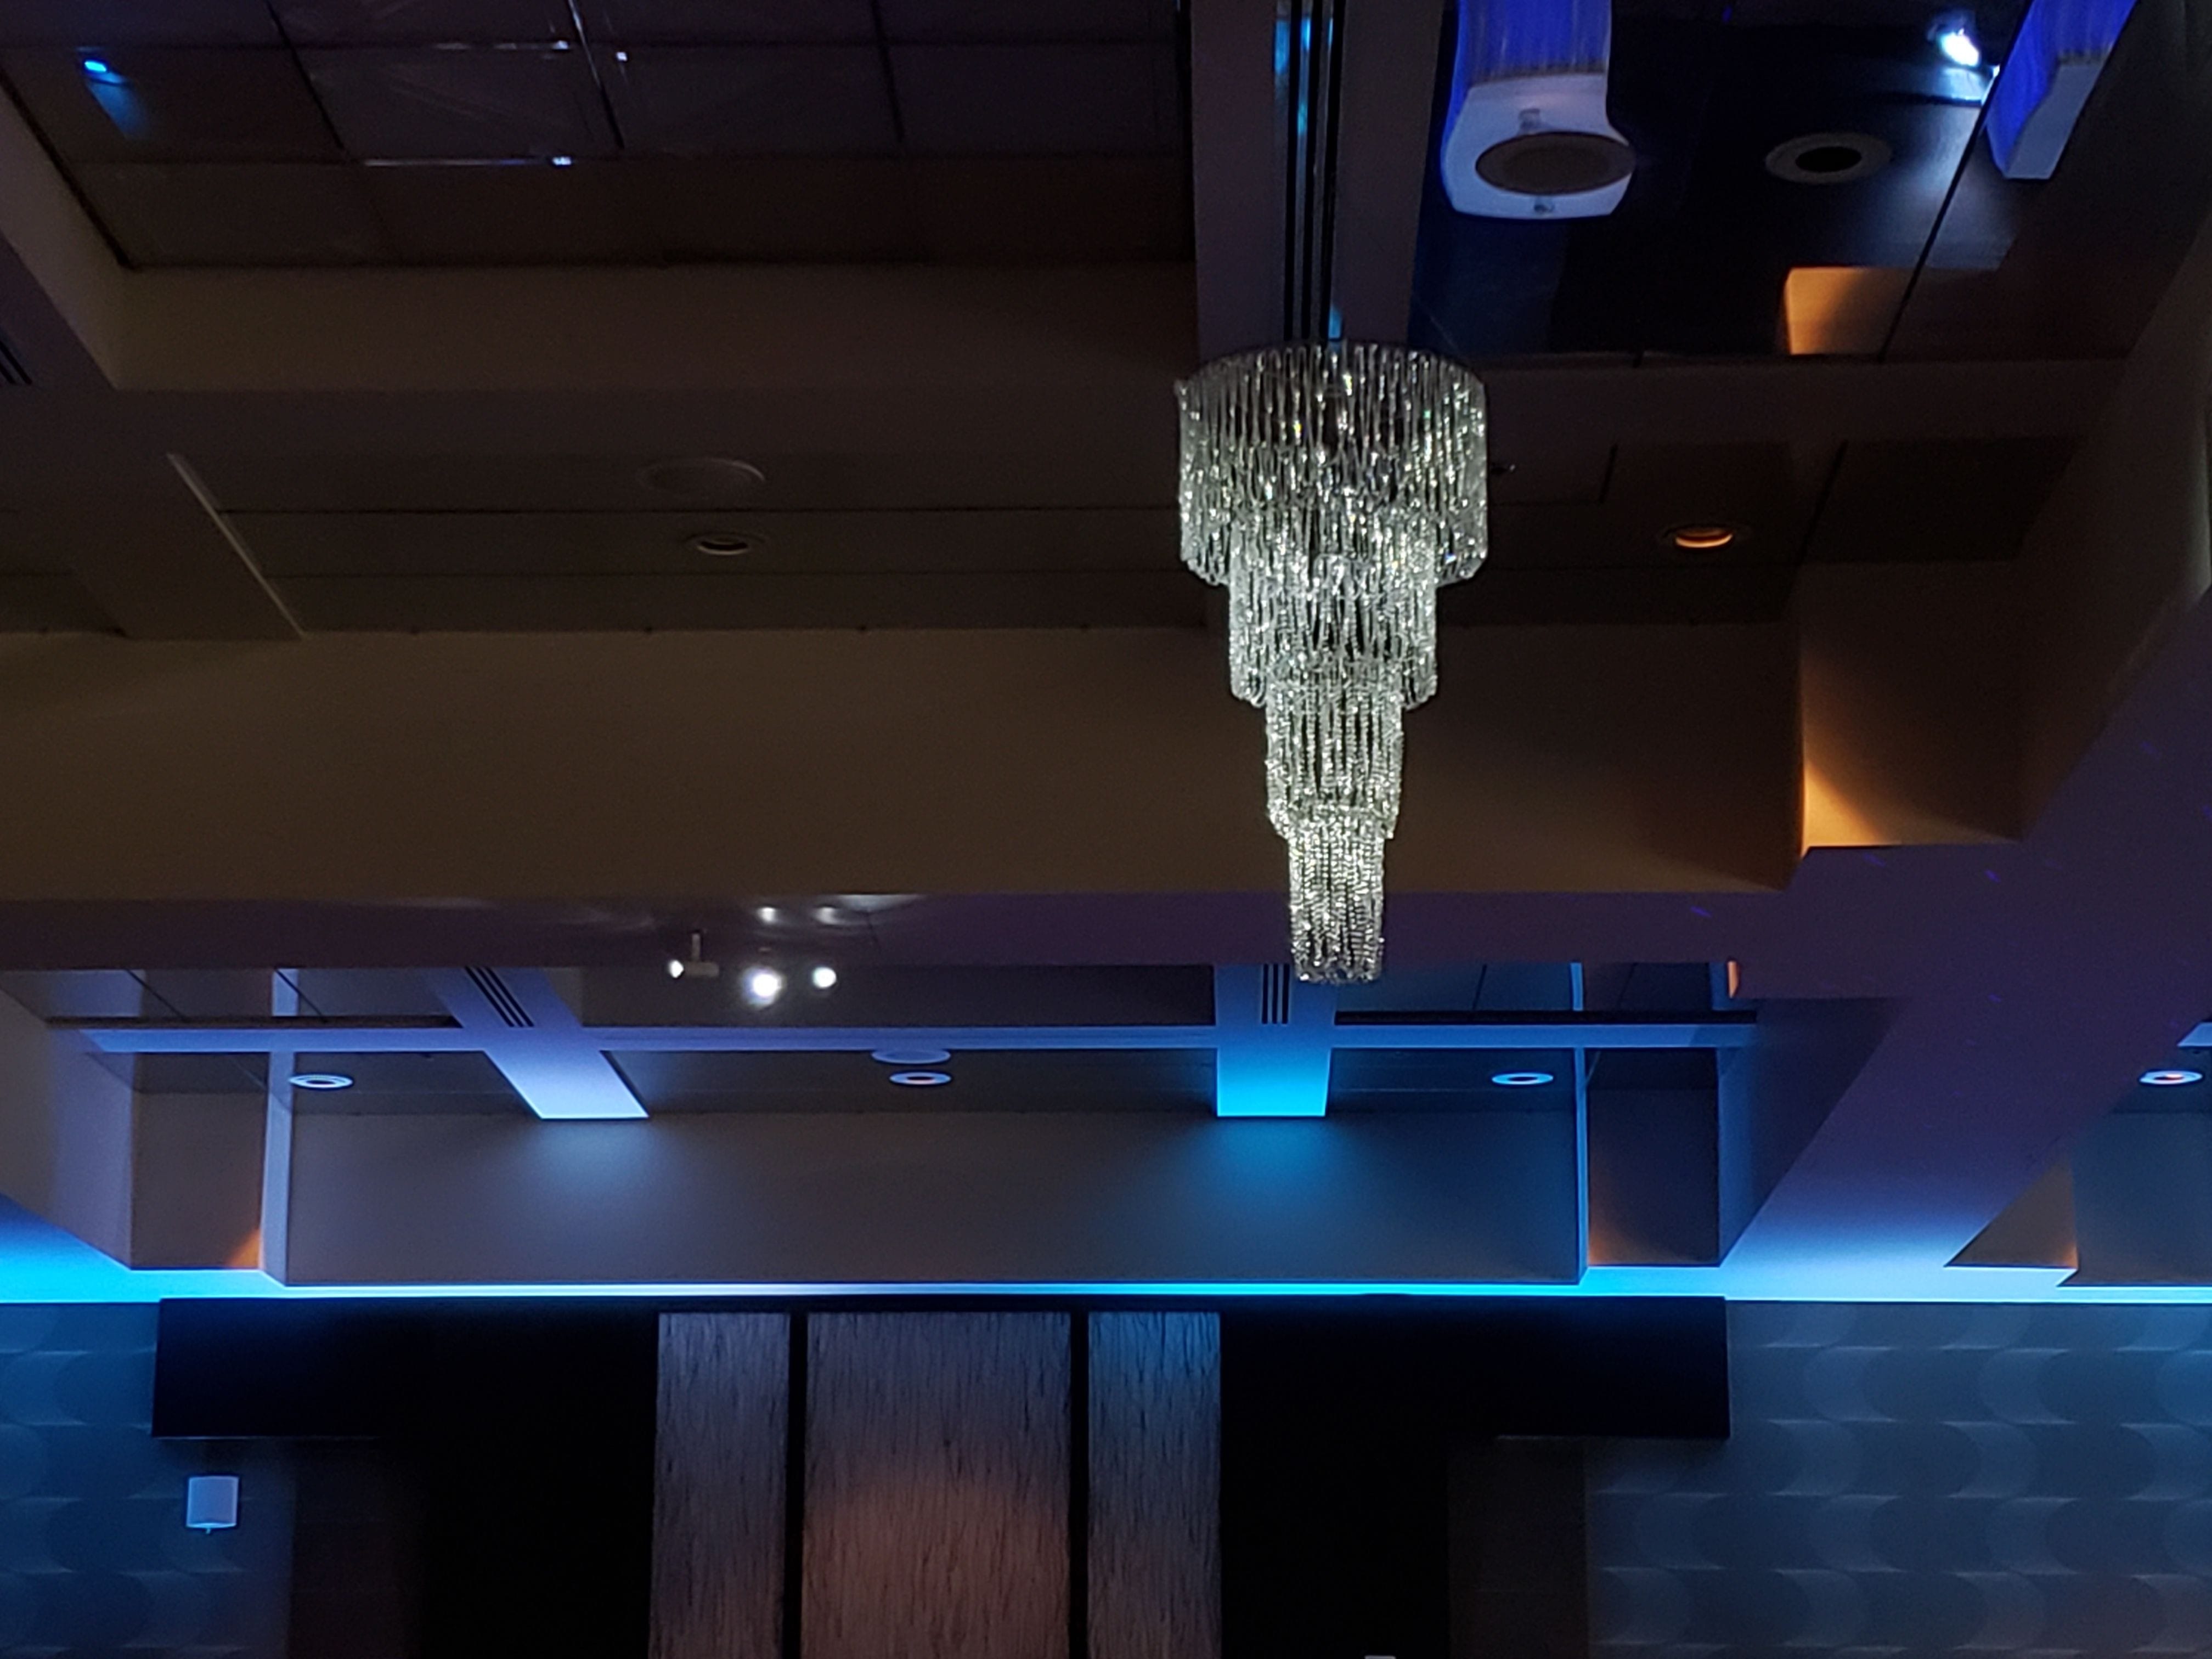 Wedding lighting at the DECC. A chandelier hangs from the ceiling.